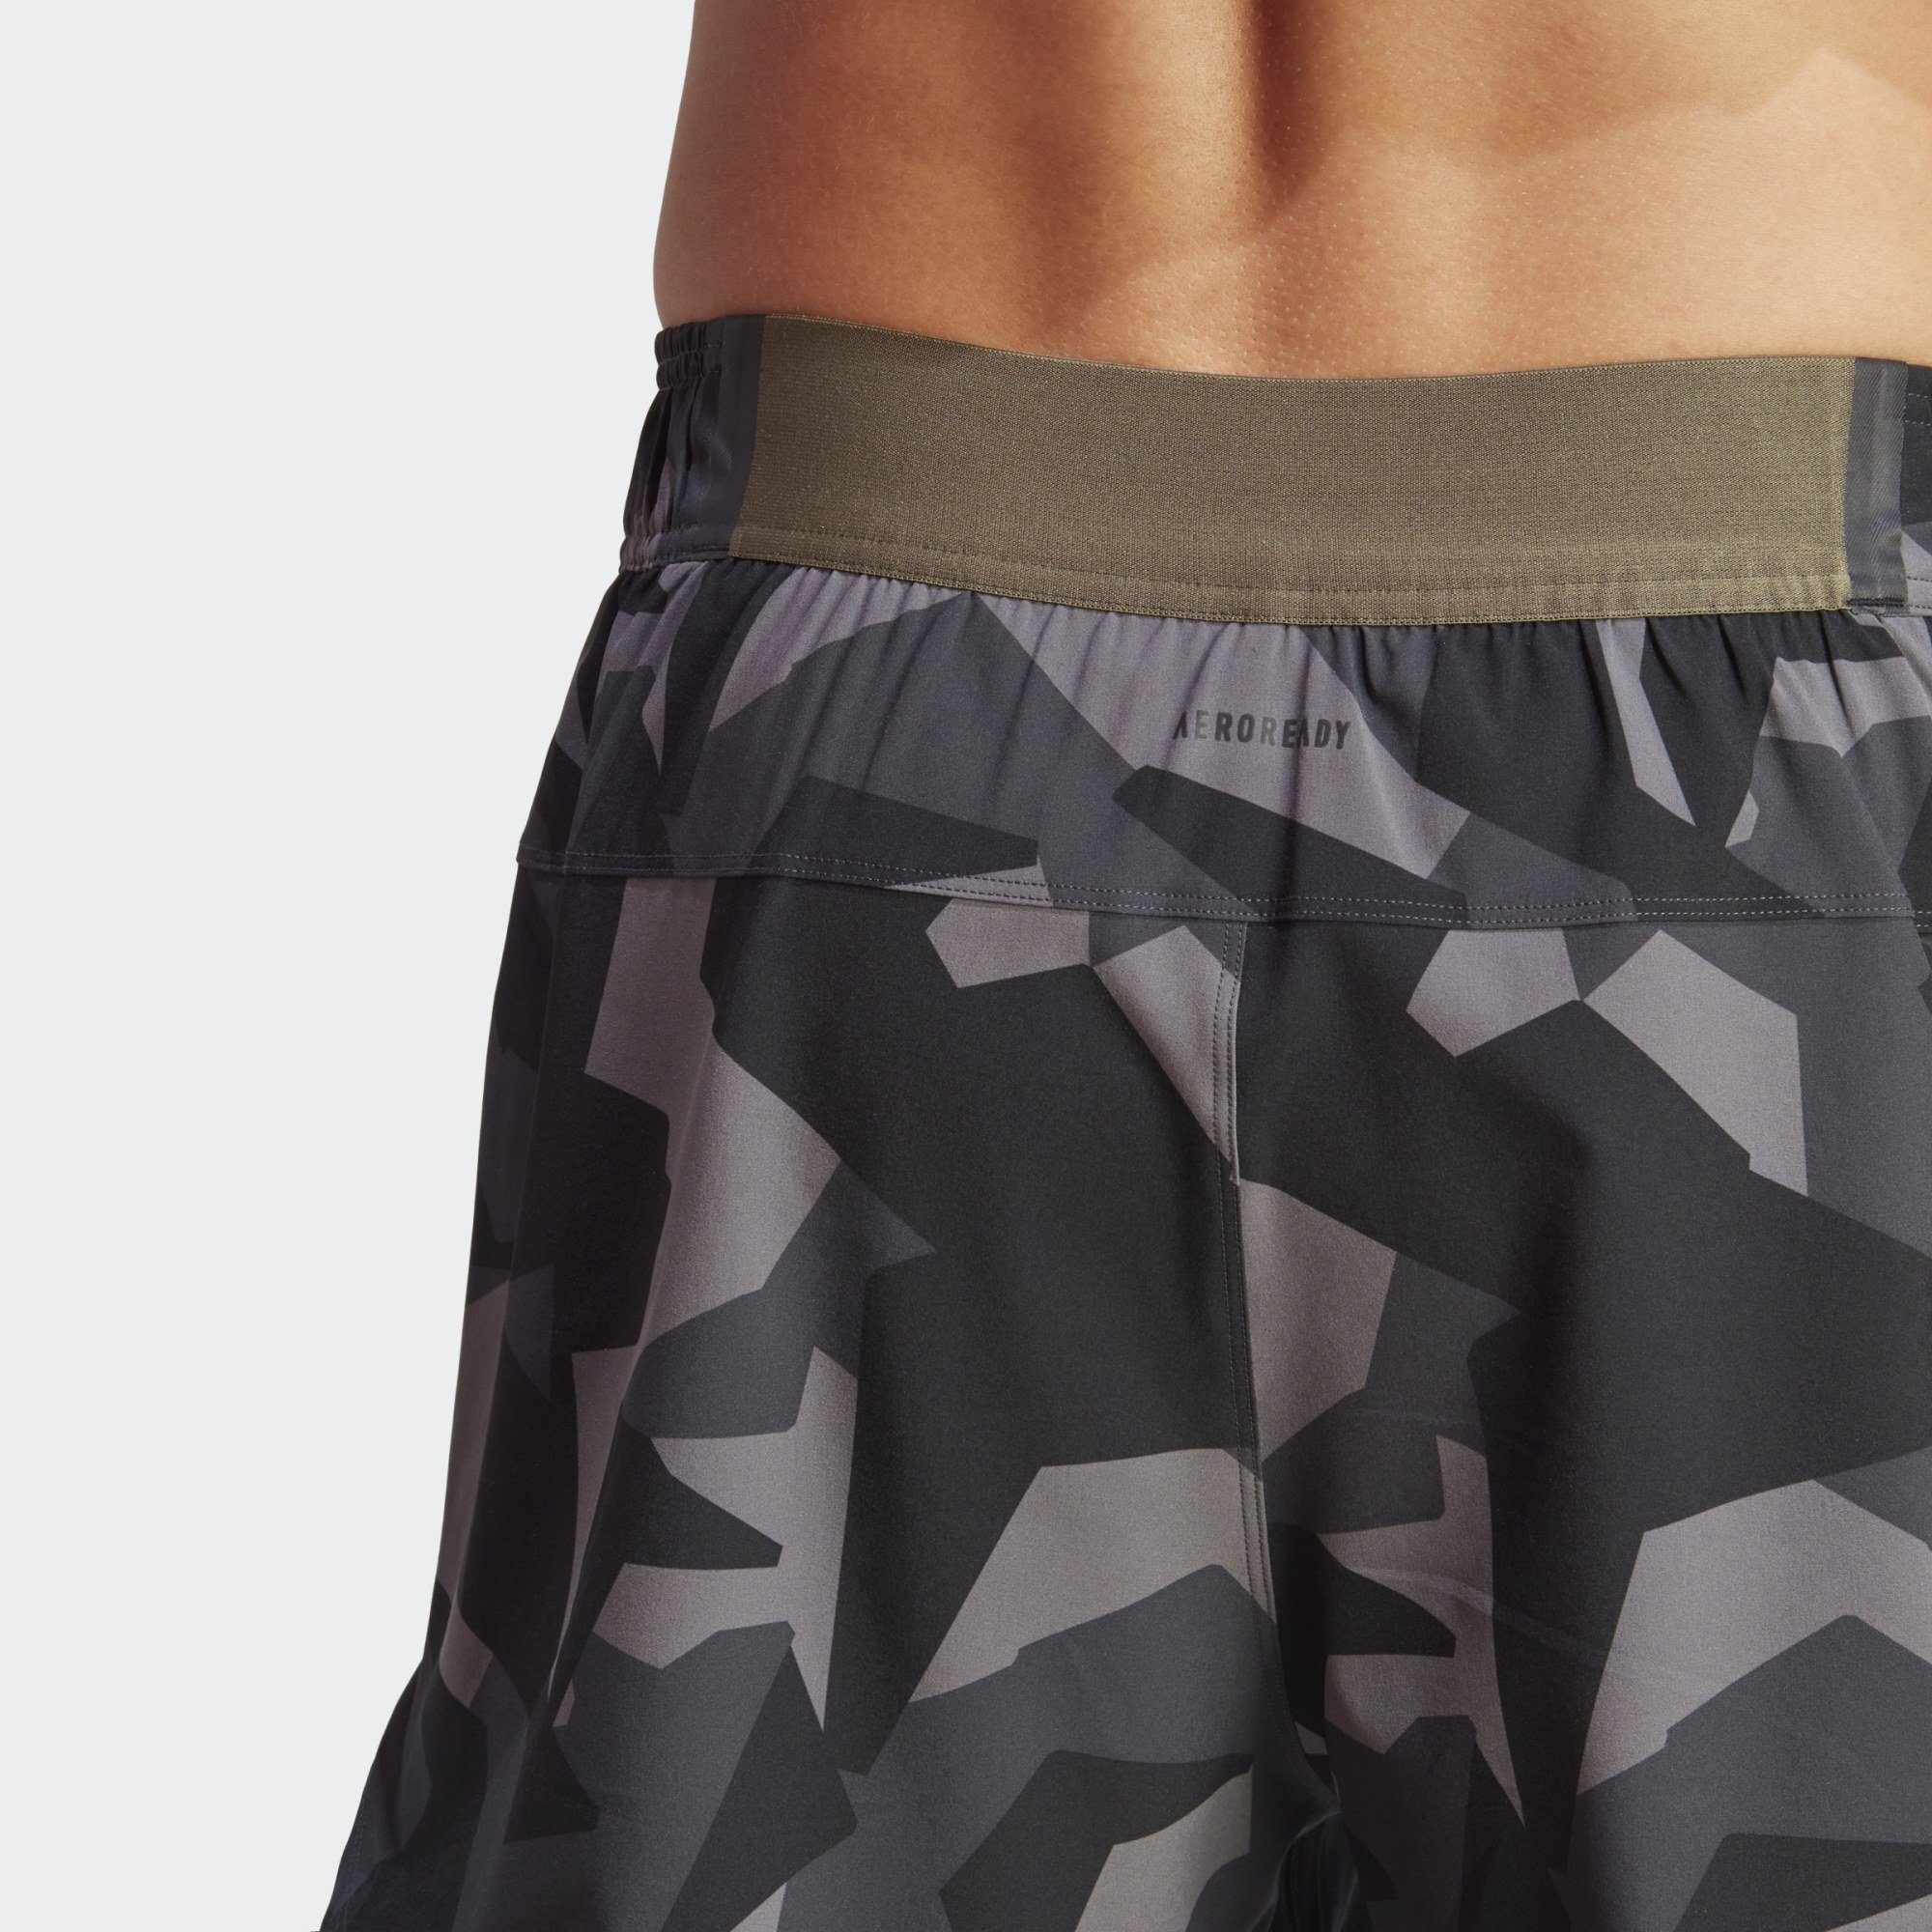 Grey SHORTS / / FOR Five SERIES PRO Carbon Black TRAINING adidas STRENGTH DESIGNED Performance Funktionsshorts